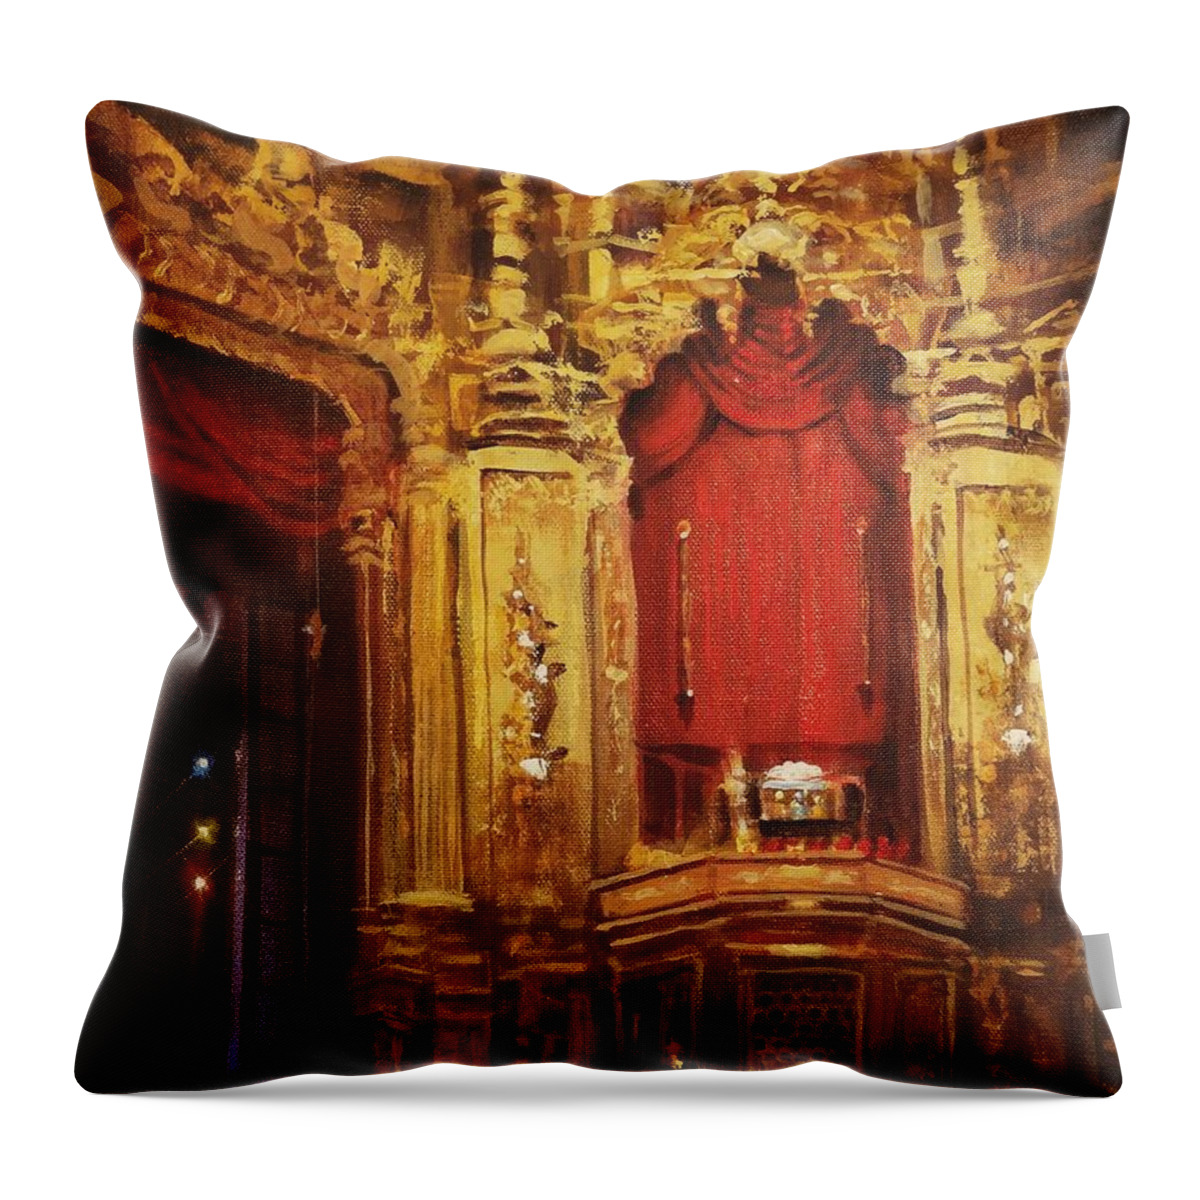 Oriental Theater Chicago Throw Pillow featuring the painting Inside the Oriental Theater Chicago by Tom Shropshire